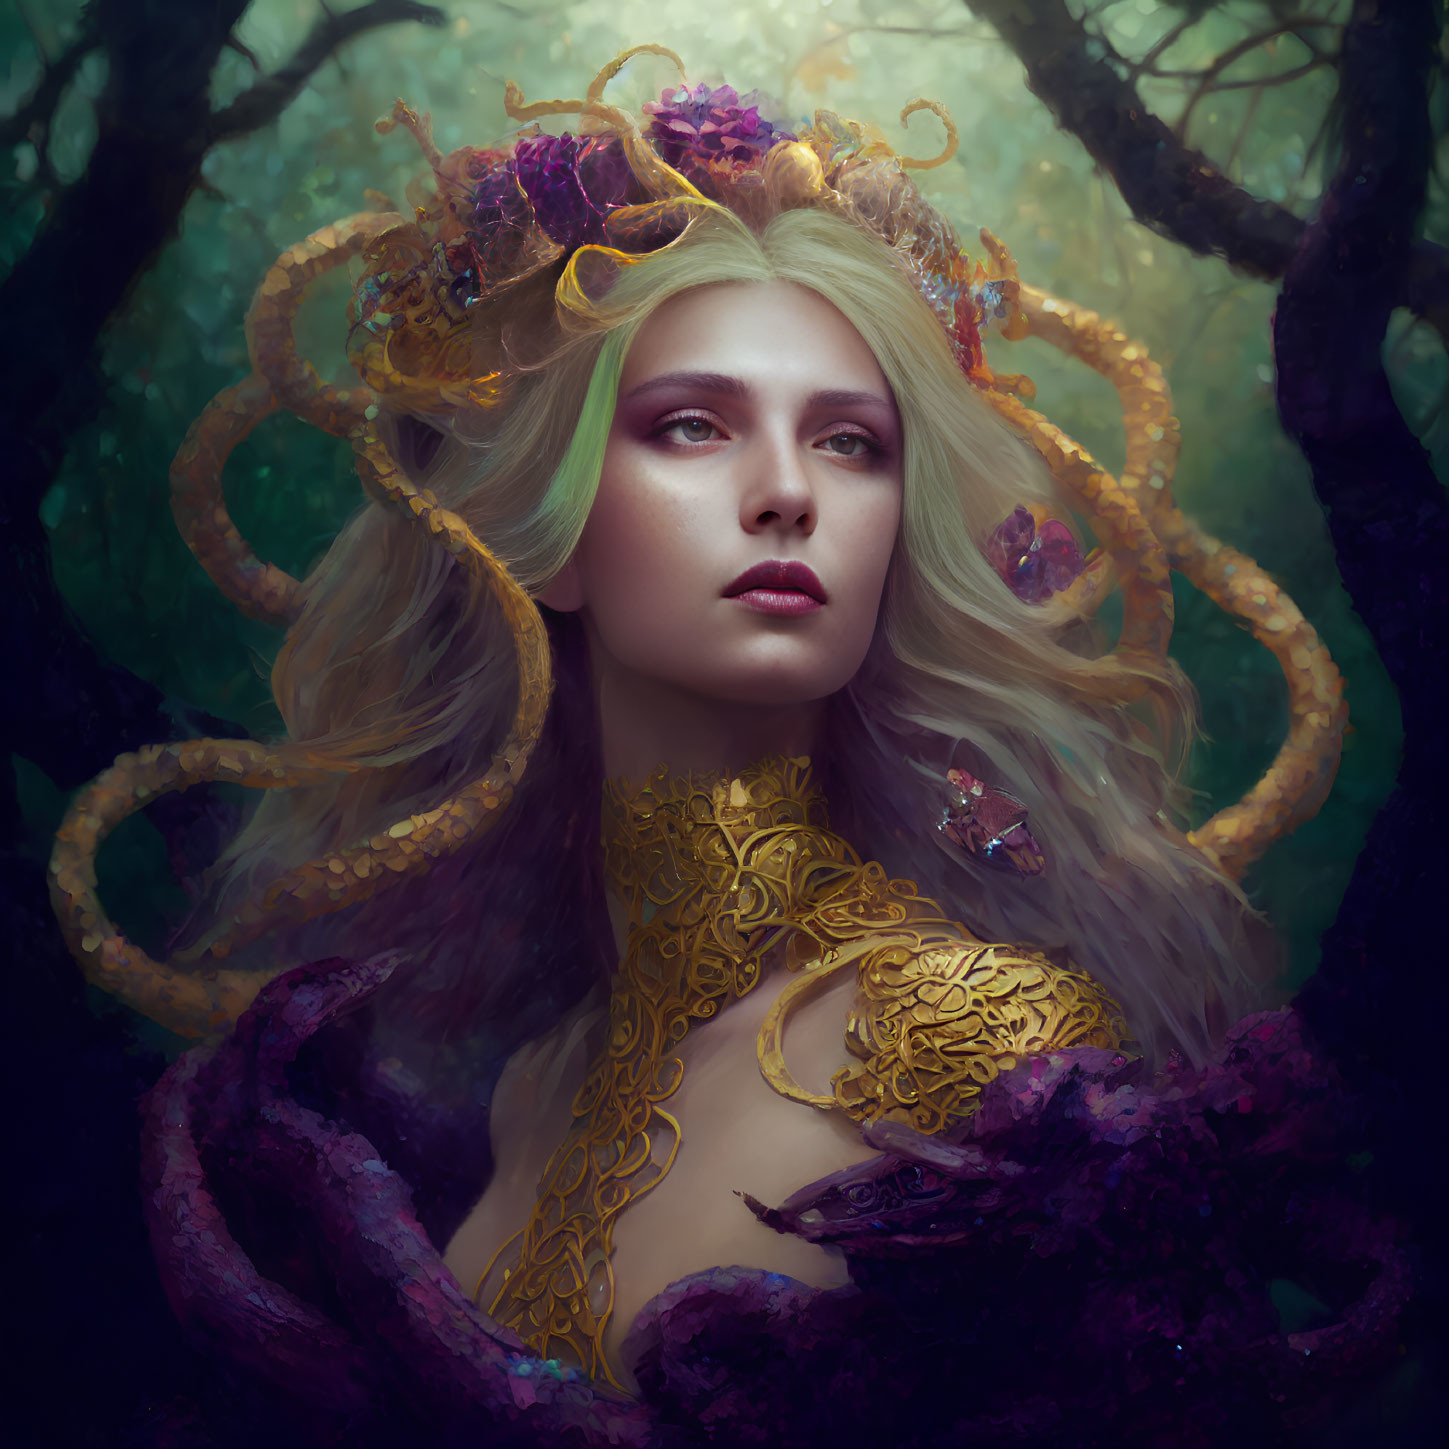 Portrait of woman with pale skin and white hair, wearing purple flower crown amidst dark vines